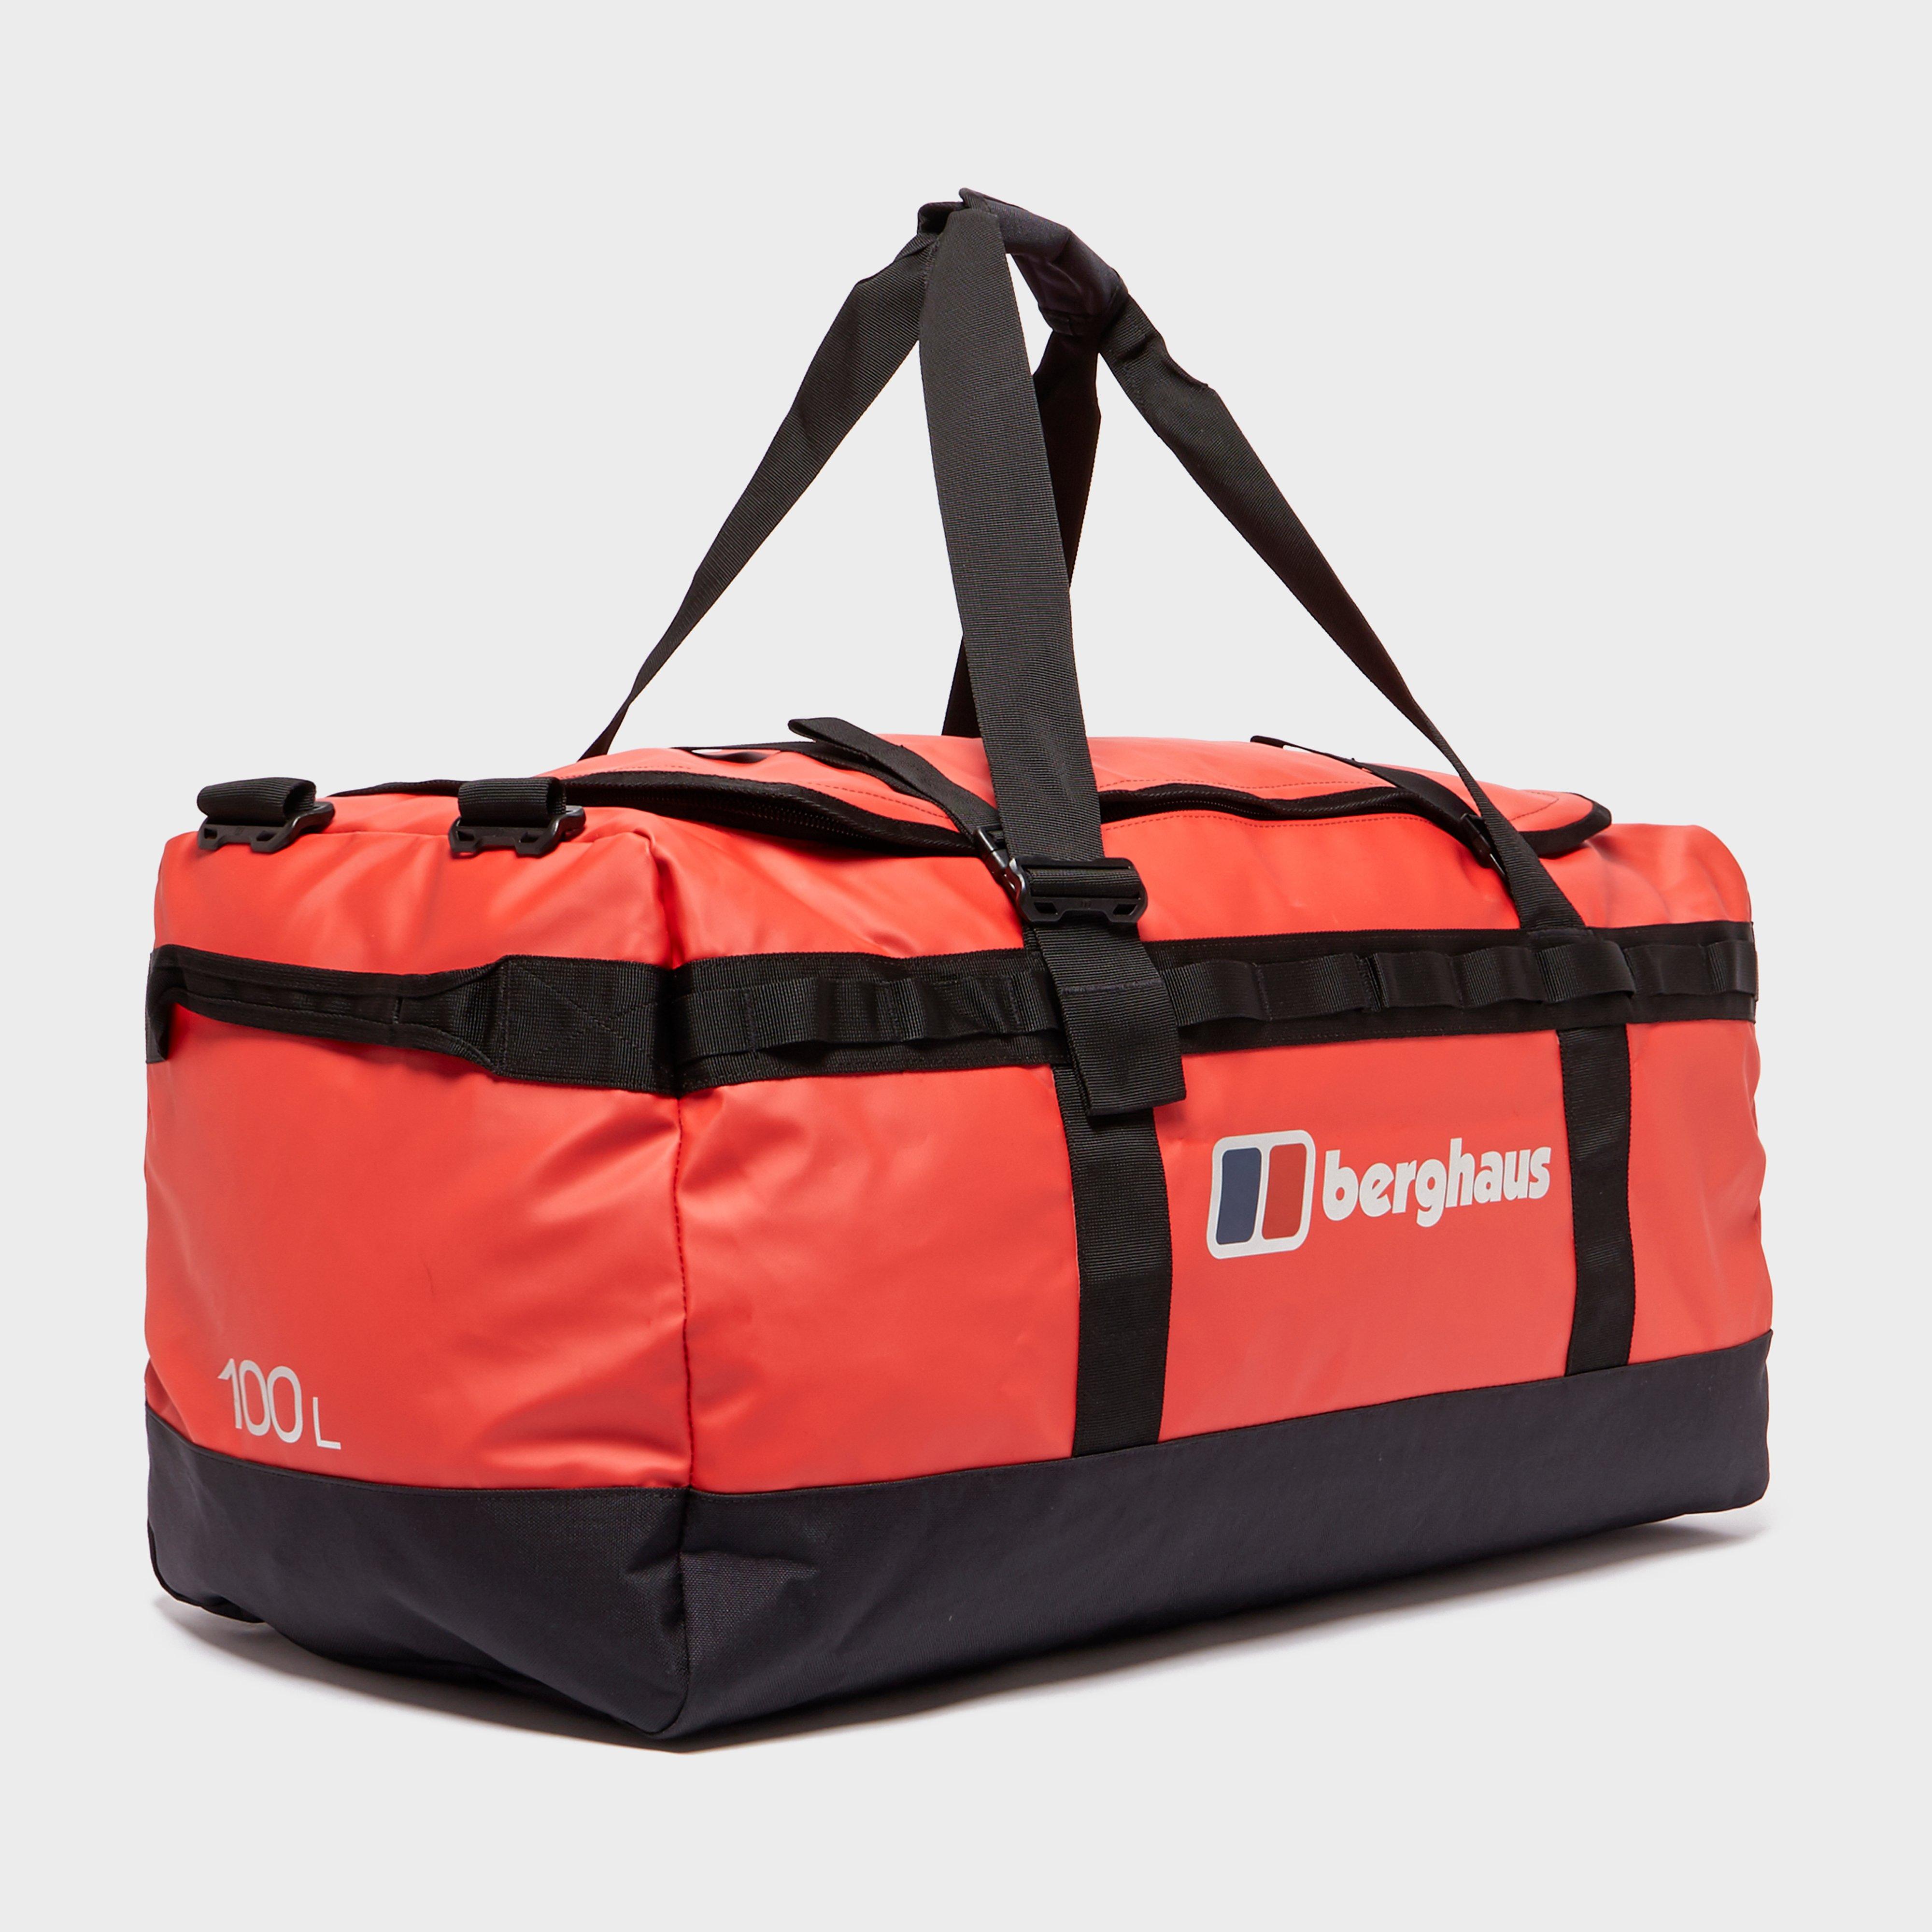 Berghaus 100l Holdall - Red/red  Red/red